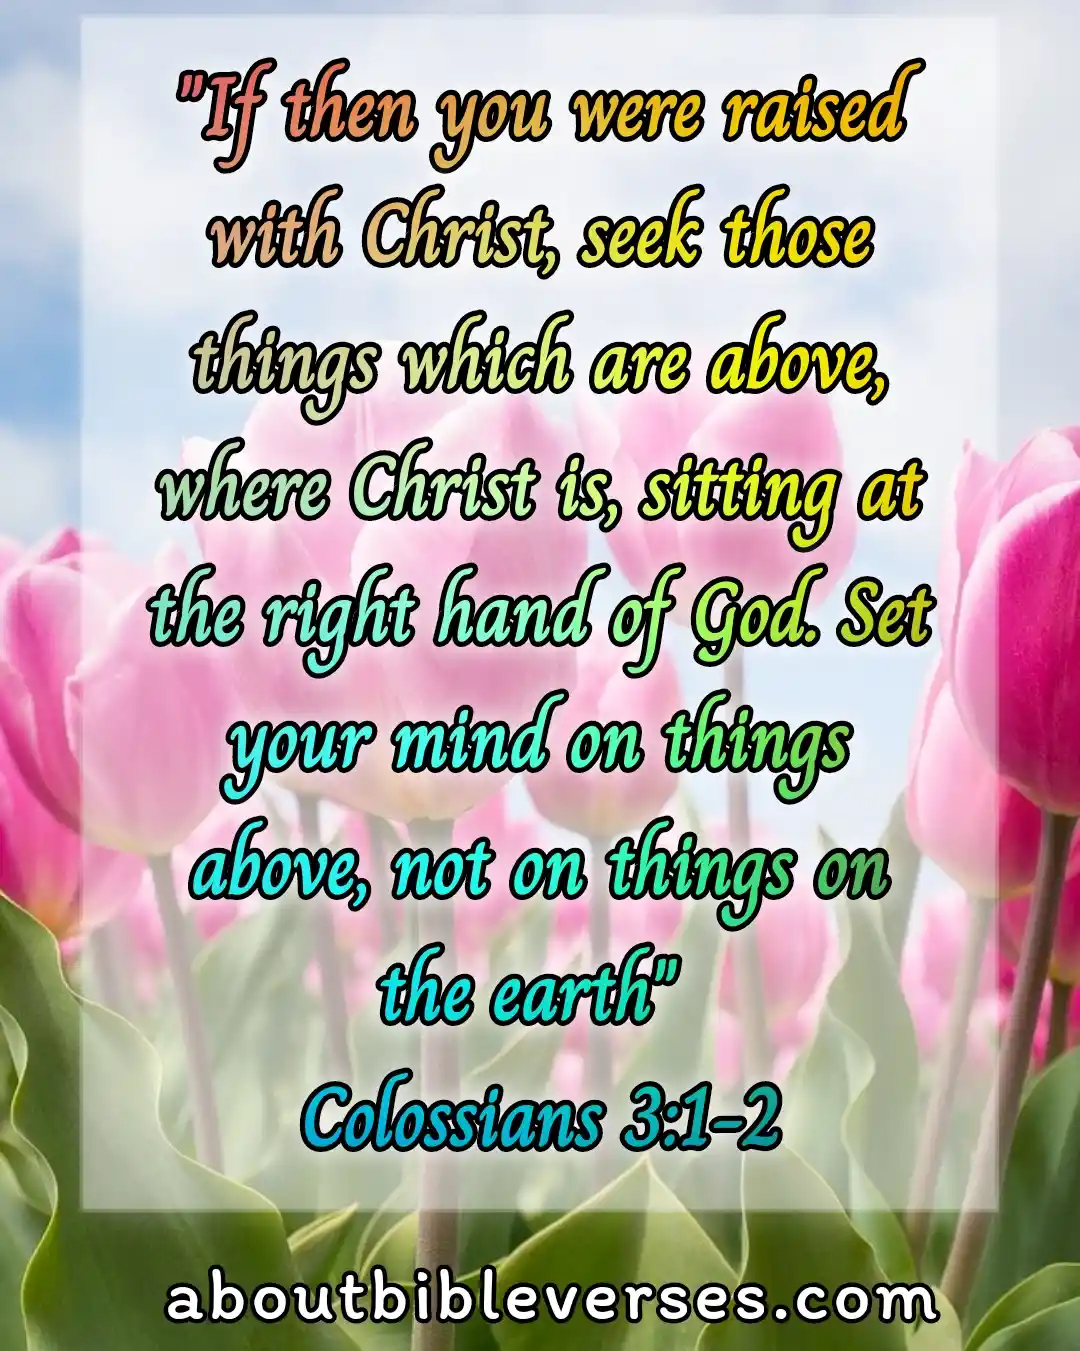 bible verses positive thinking (Colossians 3:1-2)